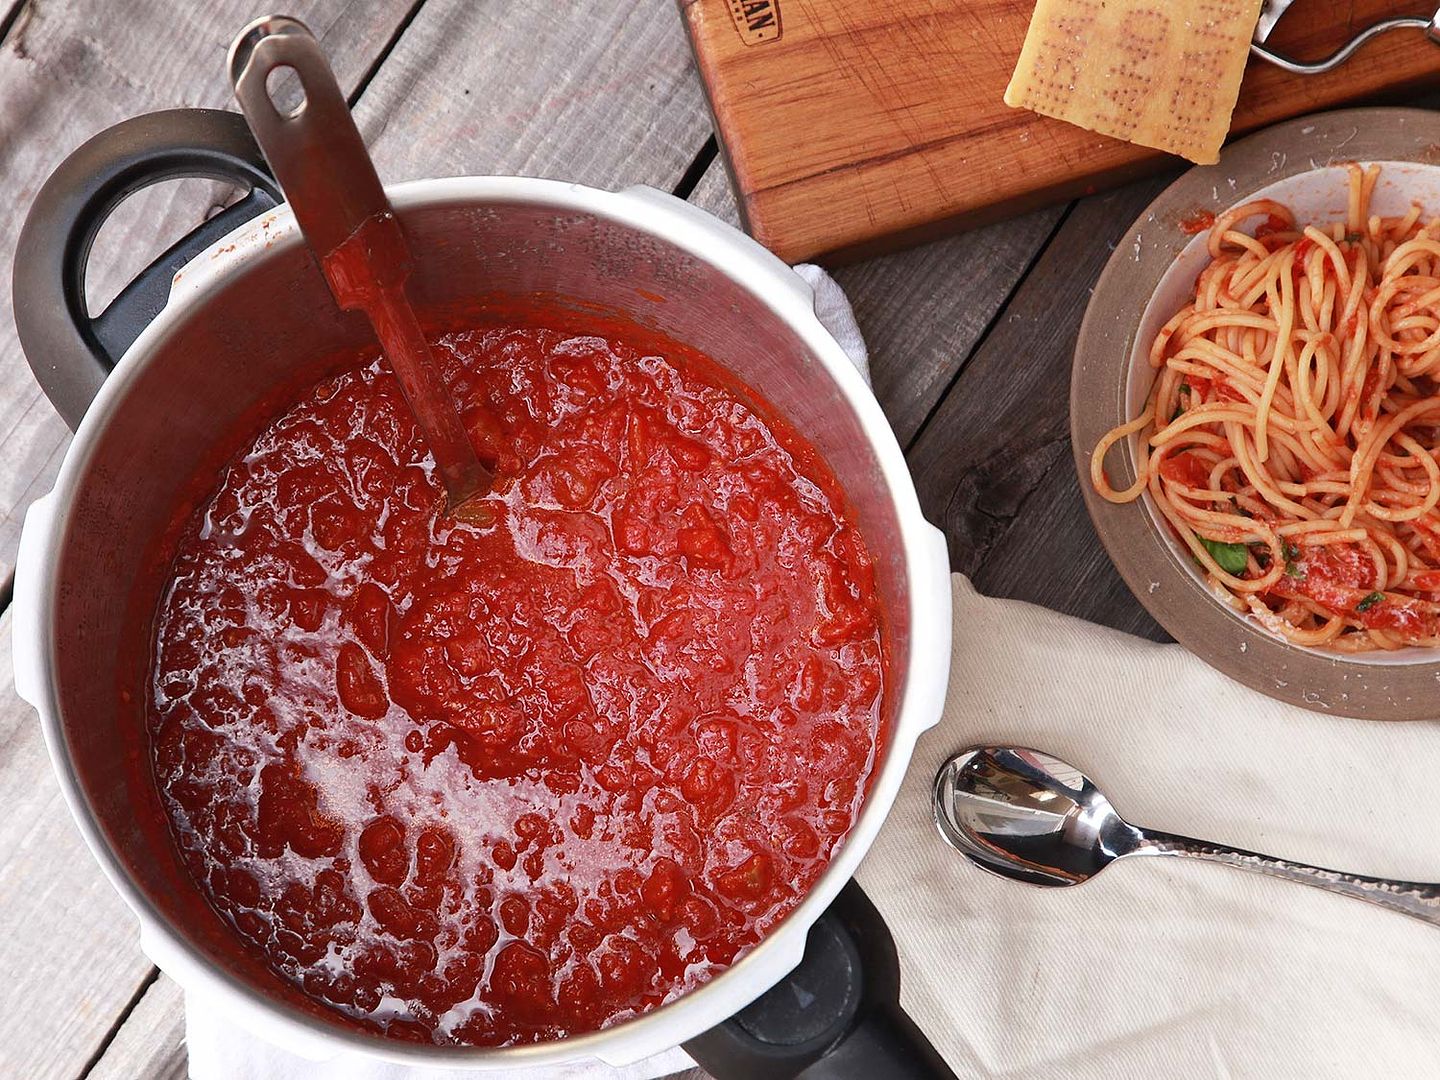 5 ways to save money on groceries using your Instant Pot: How to make tomato sauce in a pressure cooker at Serious Eats (photo by J. Kenji Lopez Alt)